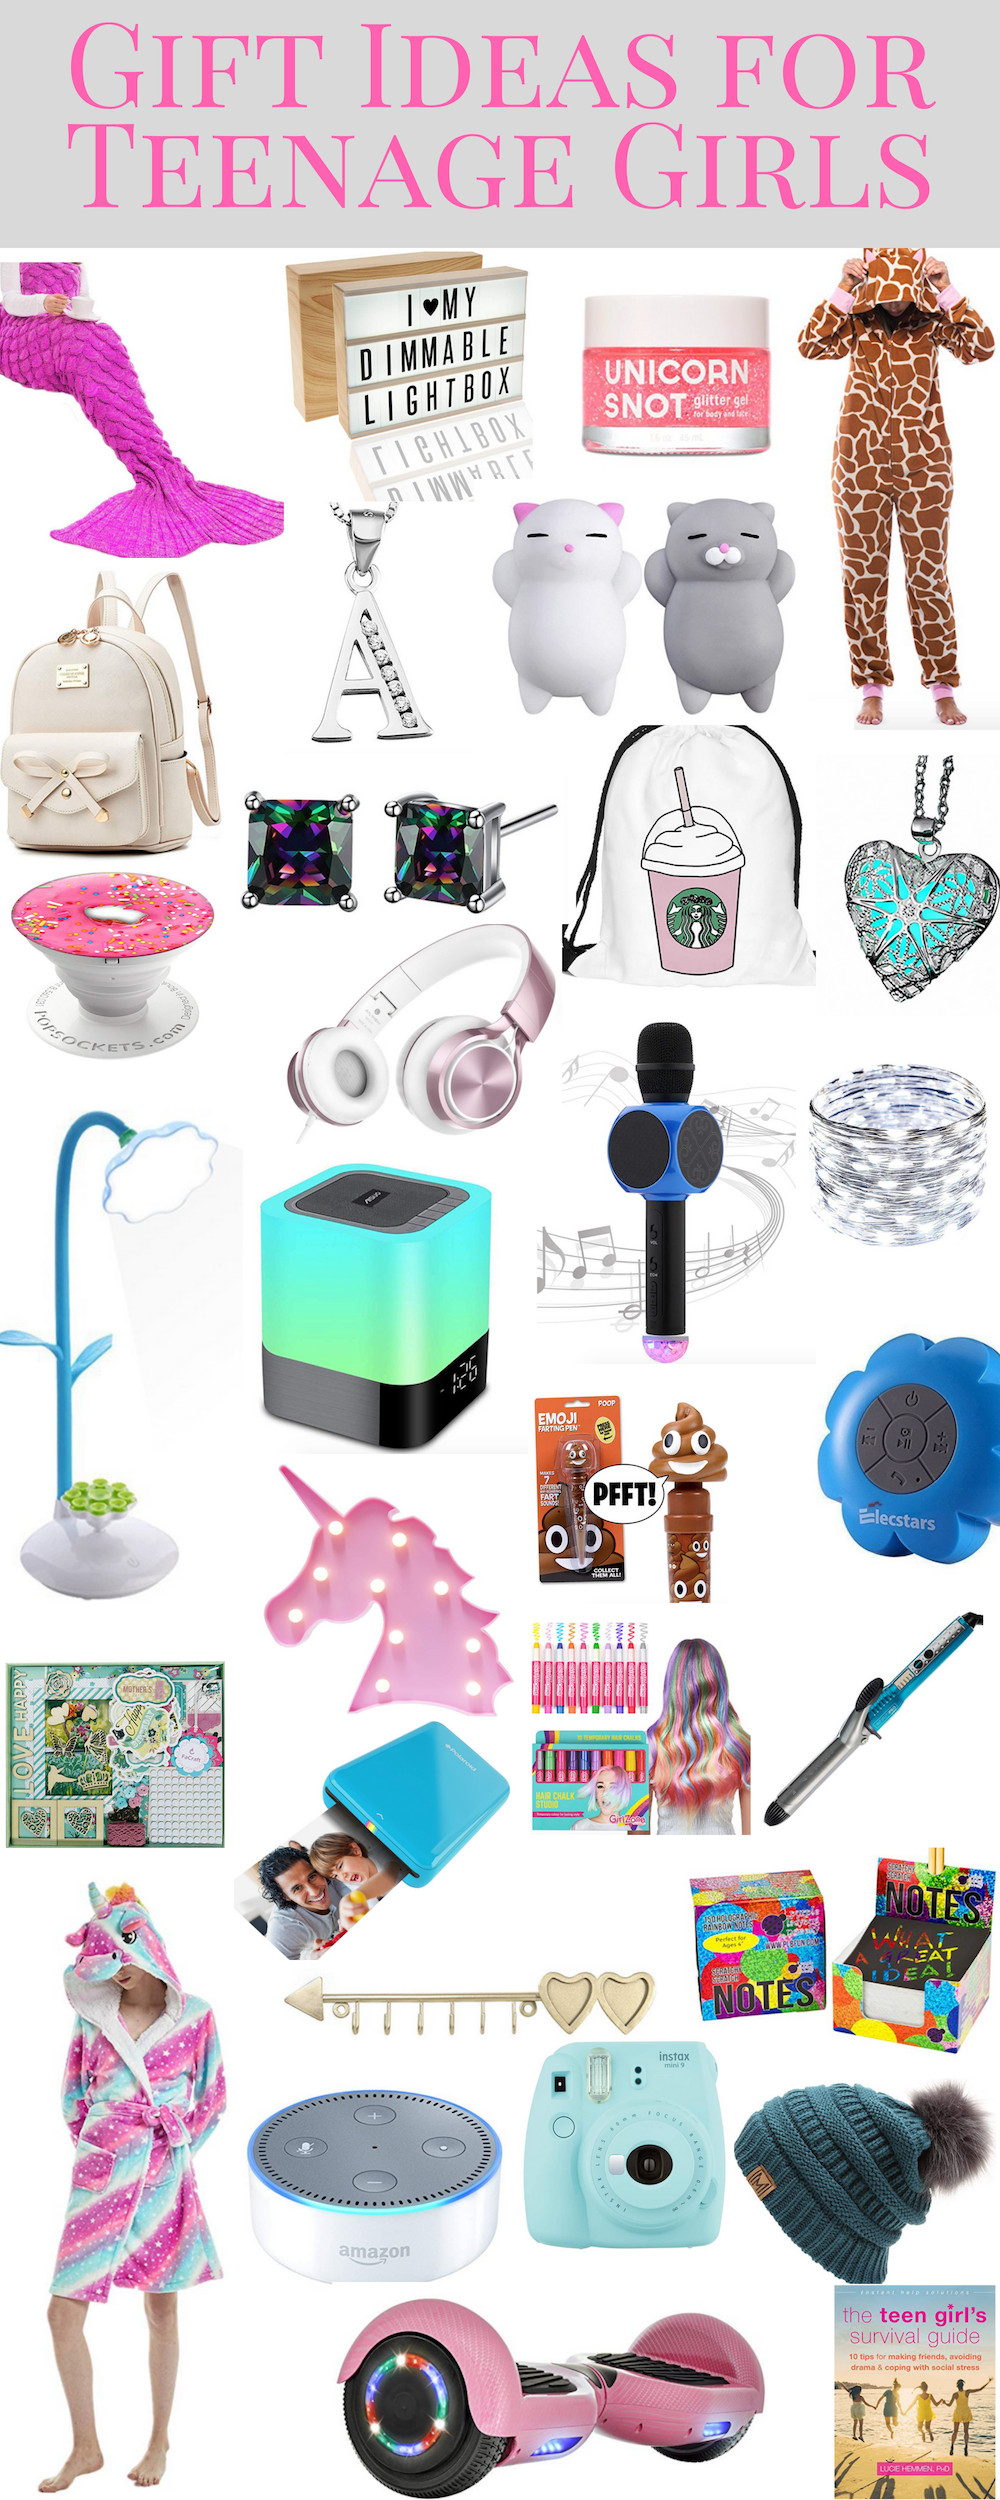 Gift Ideas Tween Girls
 Gift Ideas for Tween and Teen Girls — Our Kind of Crazy